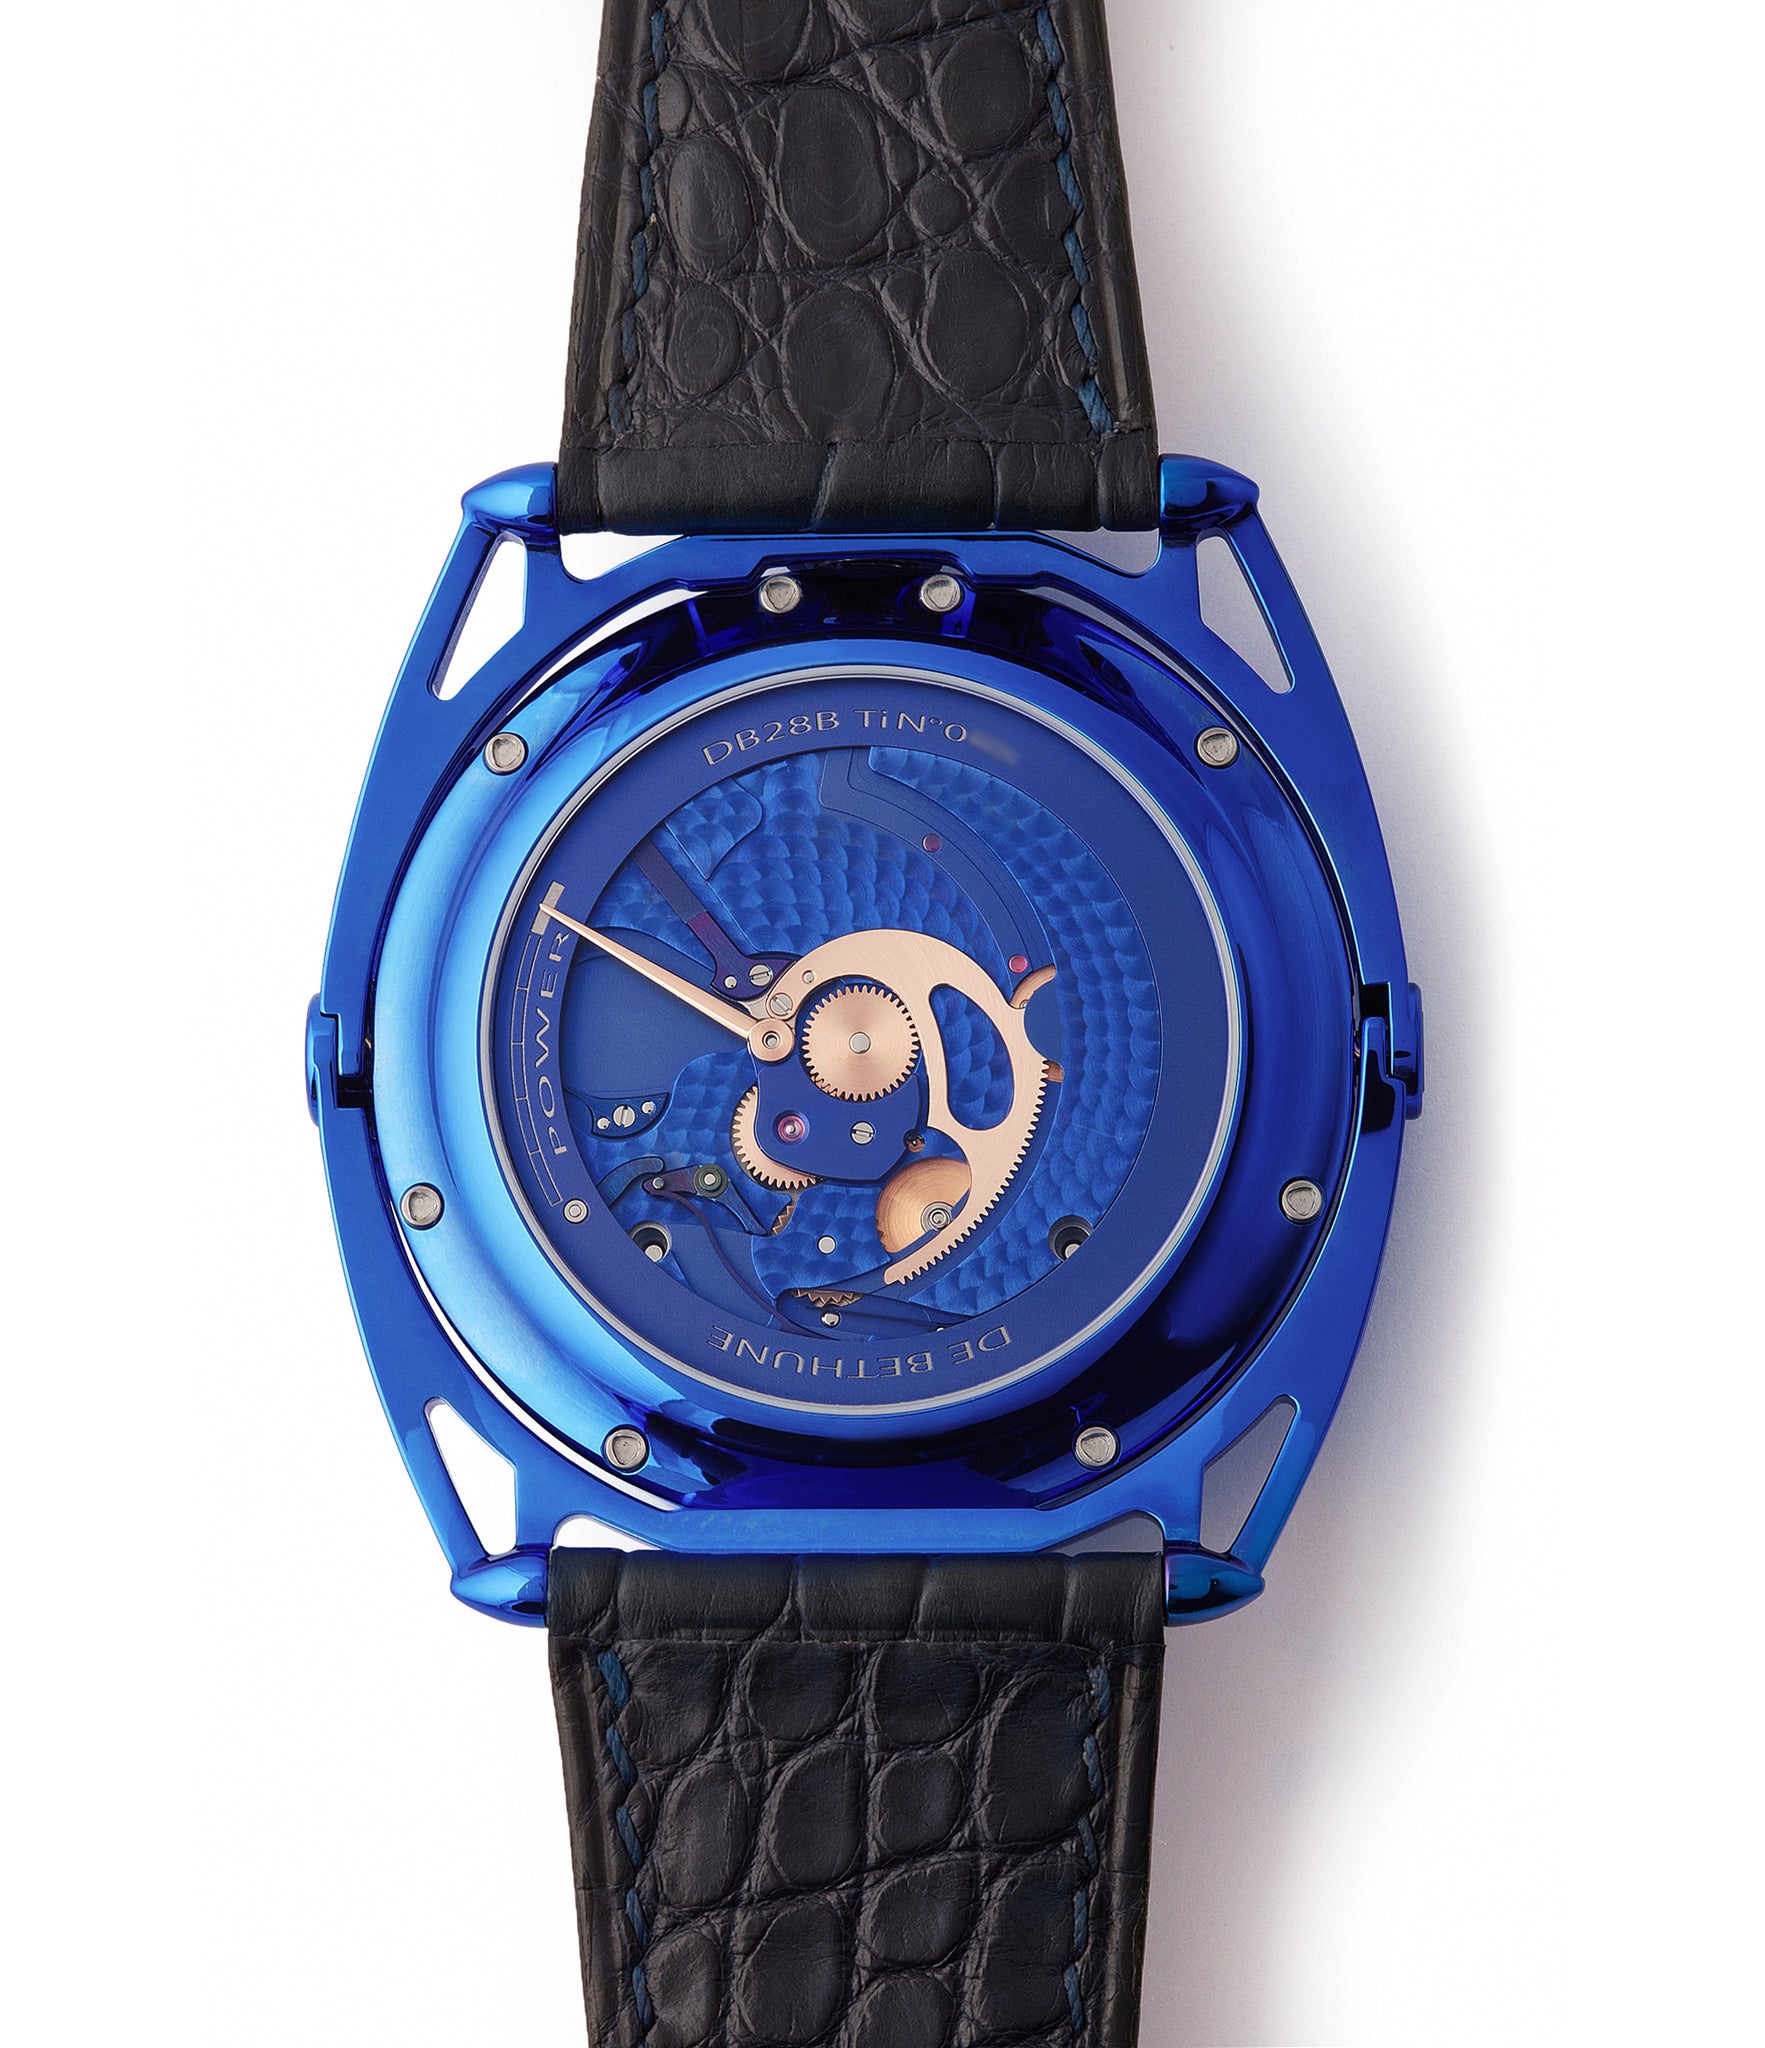 blue movement watch De Bethune DB28 Kind of Blue titanium rare limited edition independent watchmaker for sale at A Collected Man London UK specilaist of rare watches